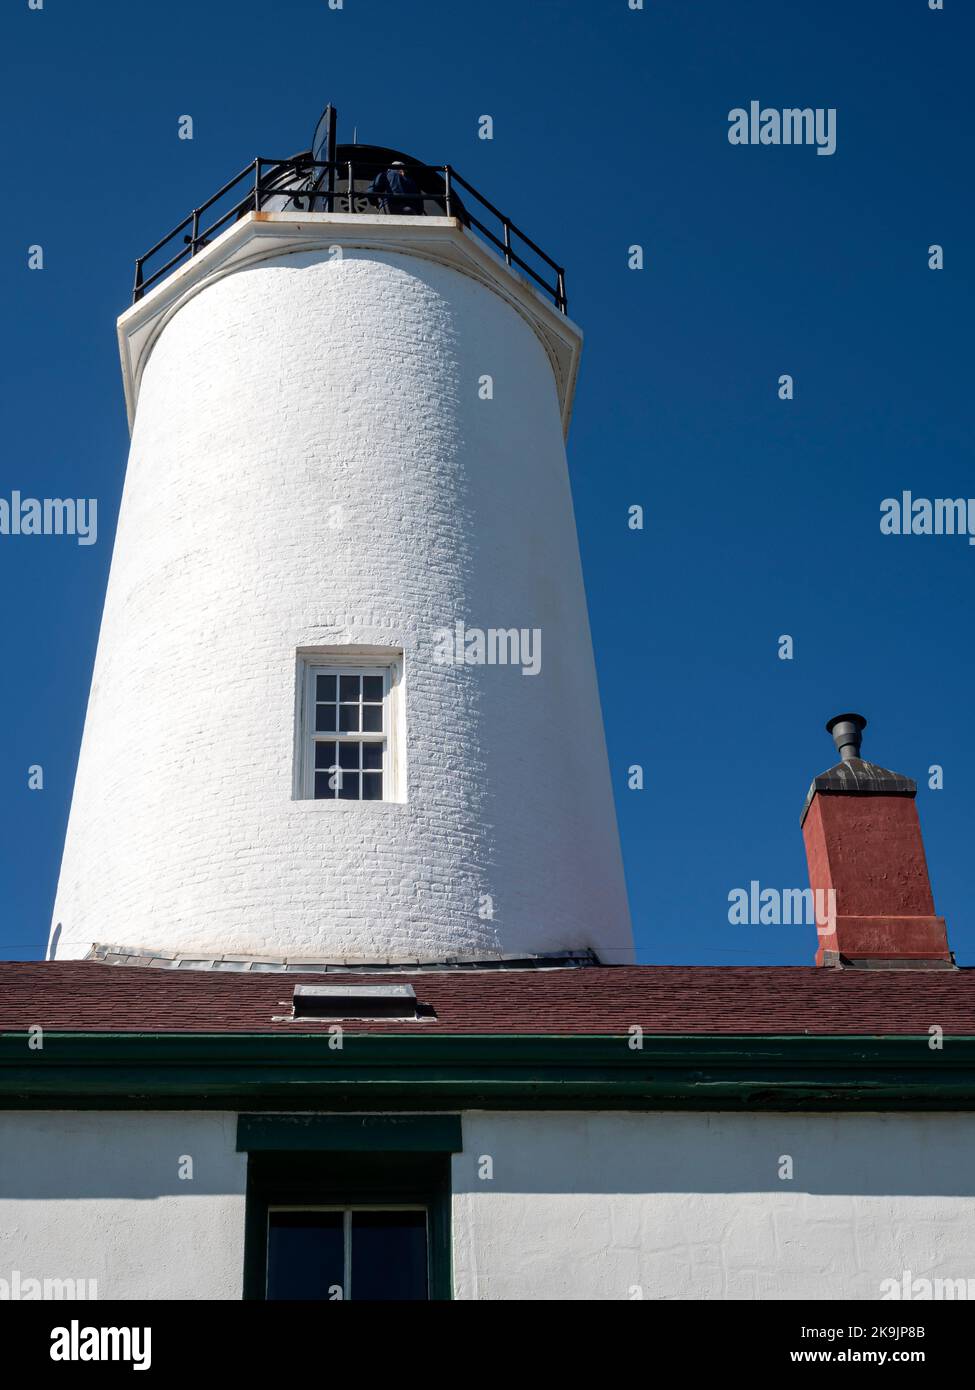 WA22635-00...WASHINGTON - Tower on the New Dungeness Lighthouse on the Strait of Juan de Fuca in the Dungeness National Wildlife Refuge. Stock Photo